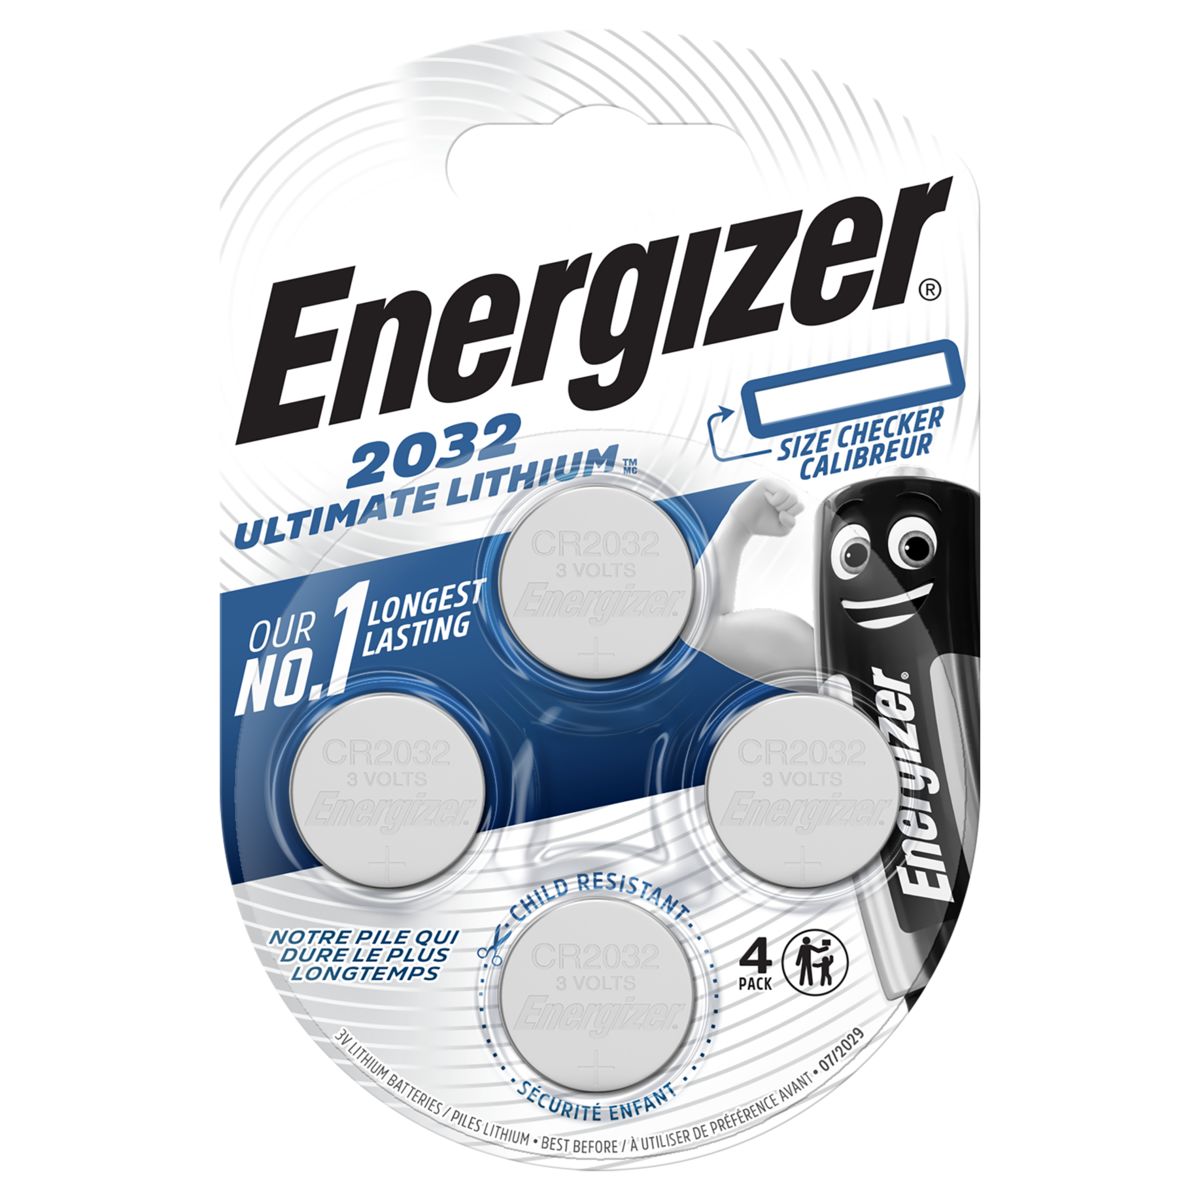 Energizer - 4 piles boutons - CR 2032